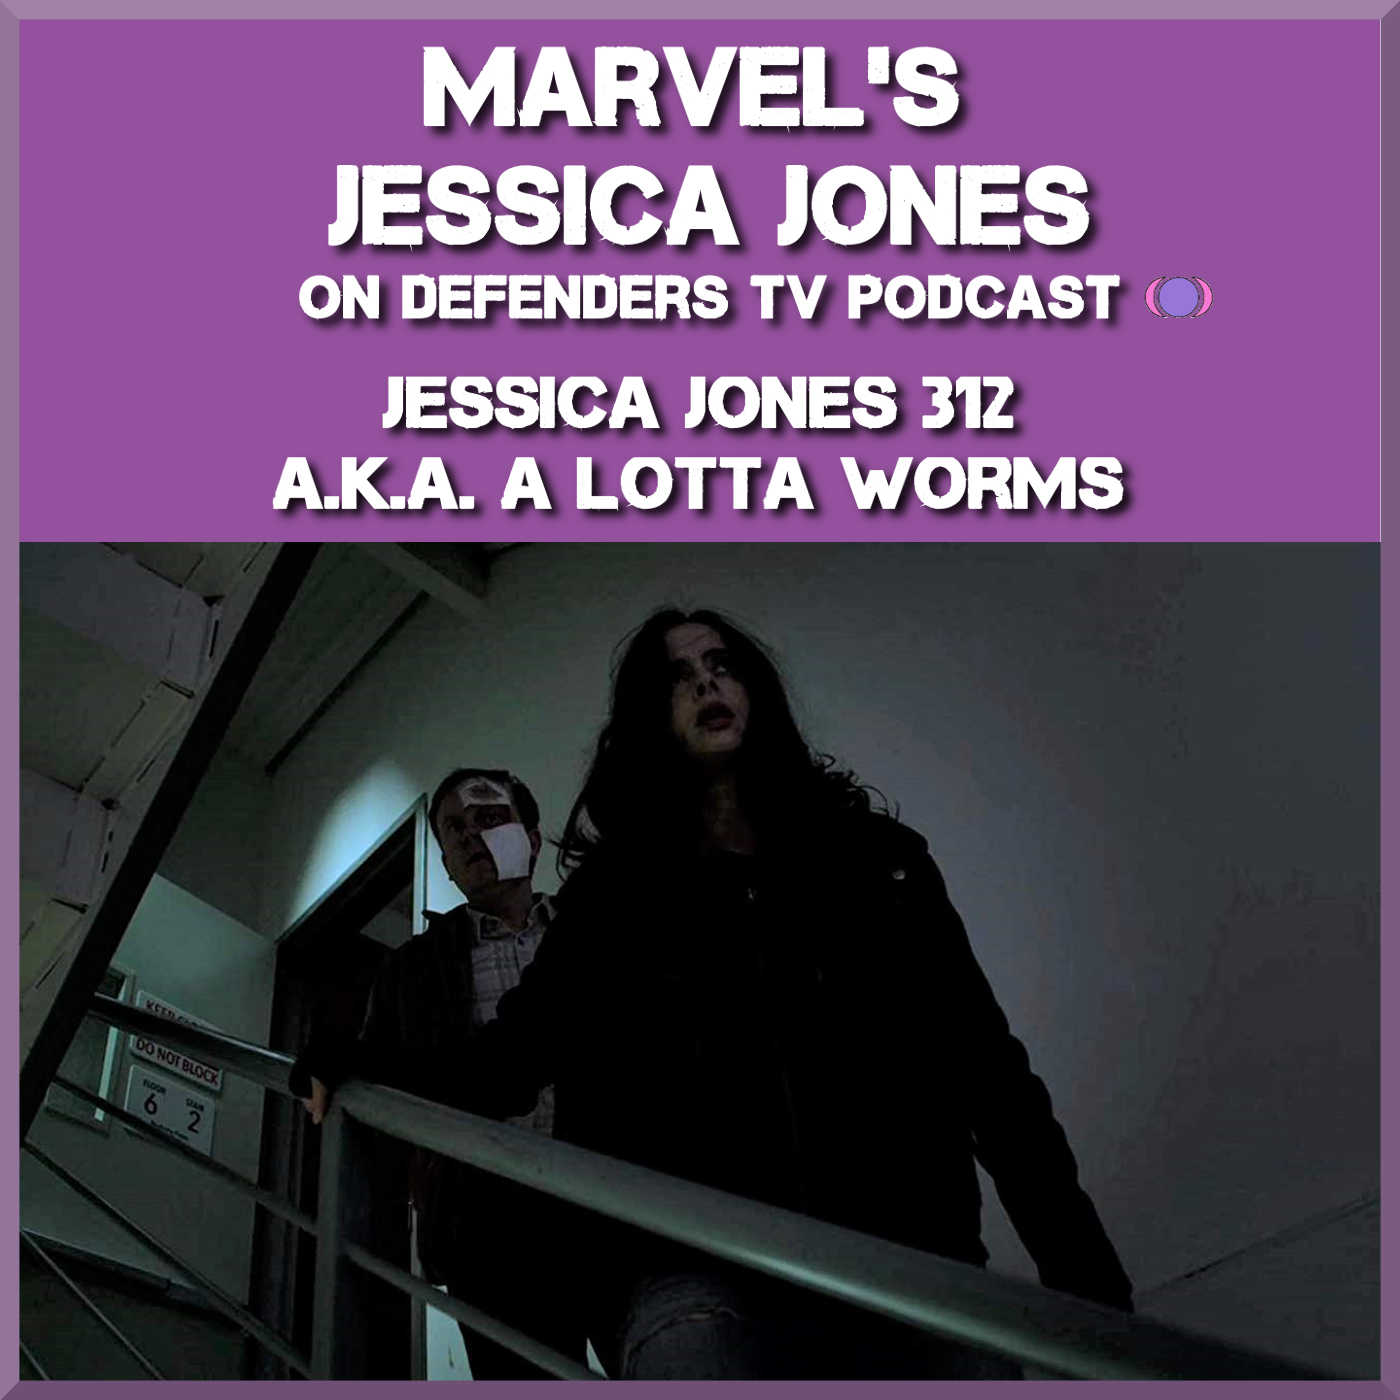 Jessica Jones 312 Review of ”AKA A Lotta Worms” by TV Podcast Industries